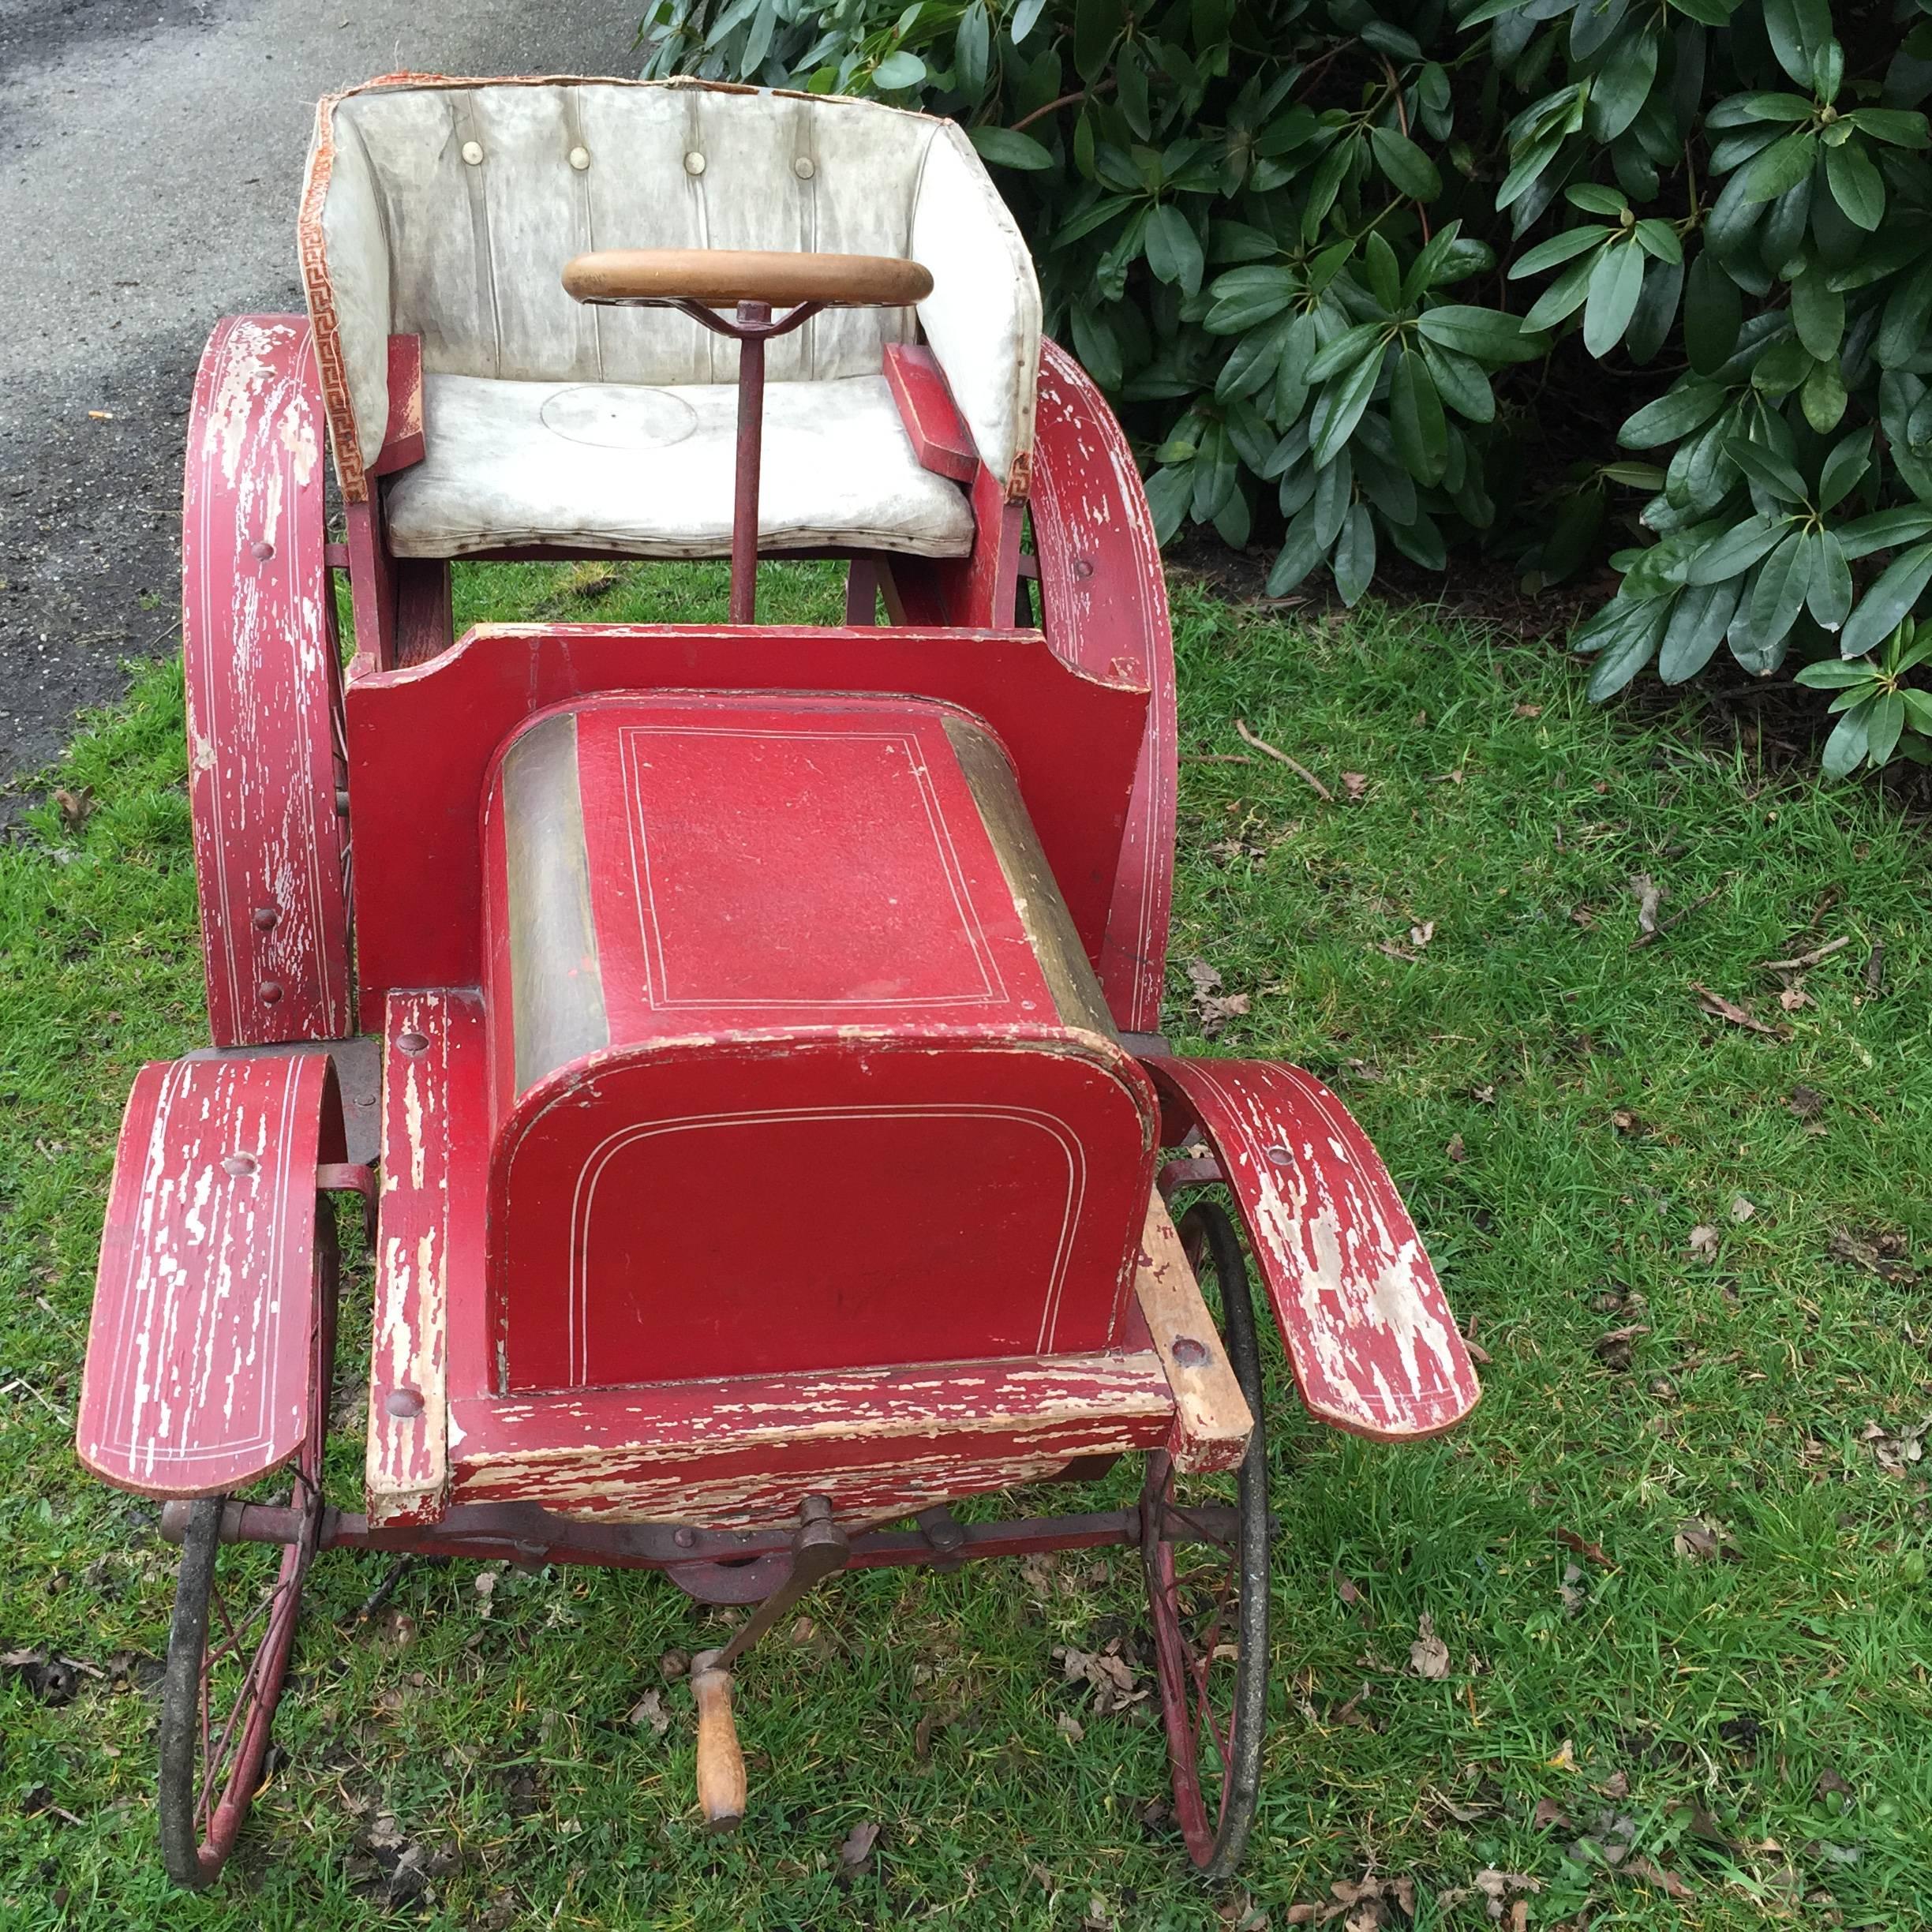 Forged French Pedal Toy Car from circa 1900 For Sale